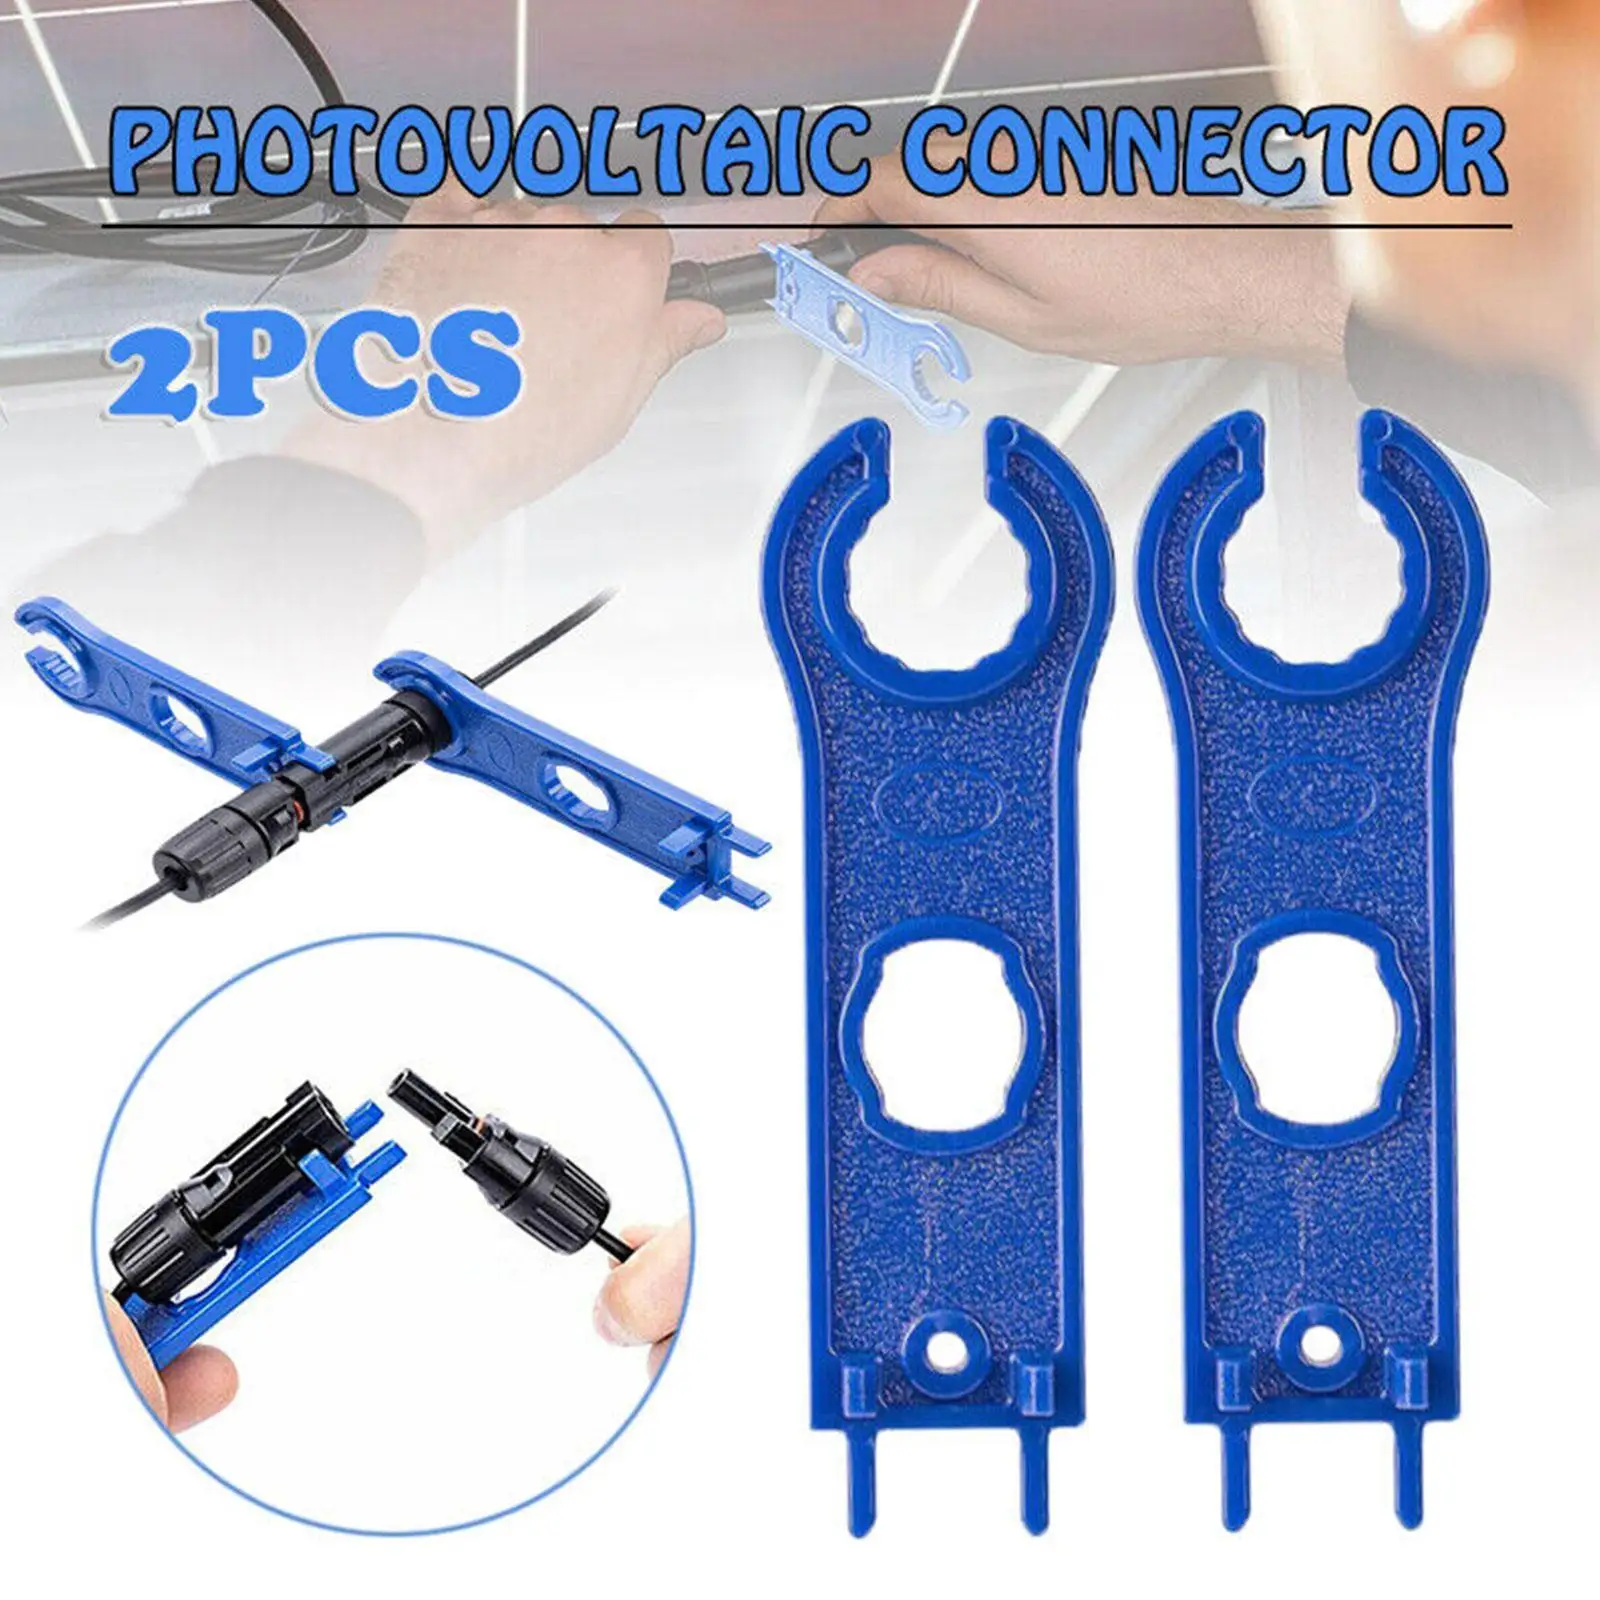 2 PCS MC4 Solar Panel Connector Disconnect Tool Spanners Wrench ABS Plastic Pocket Solar Connector Wrench